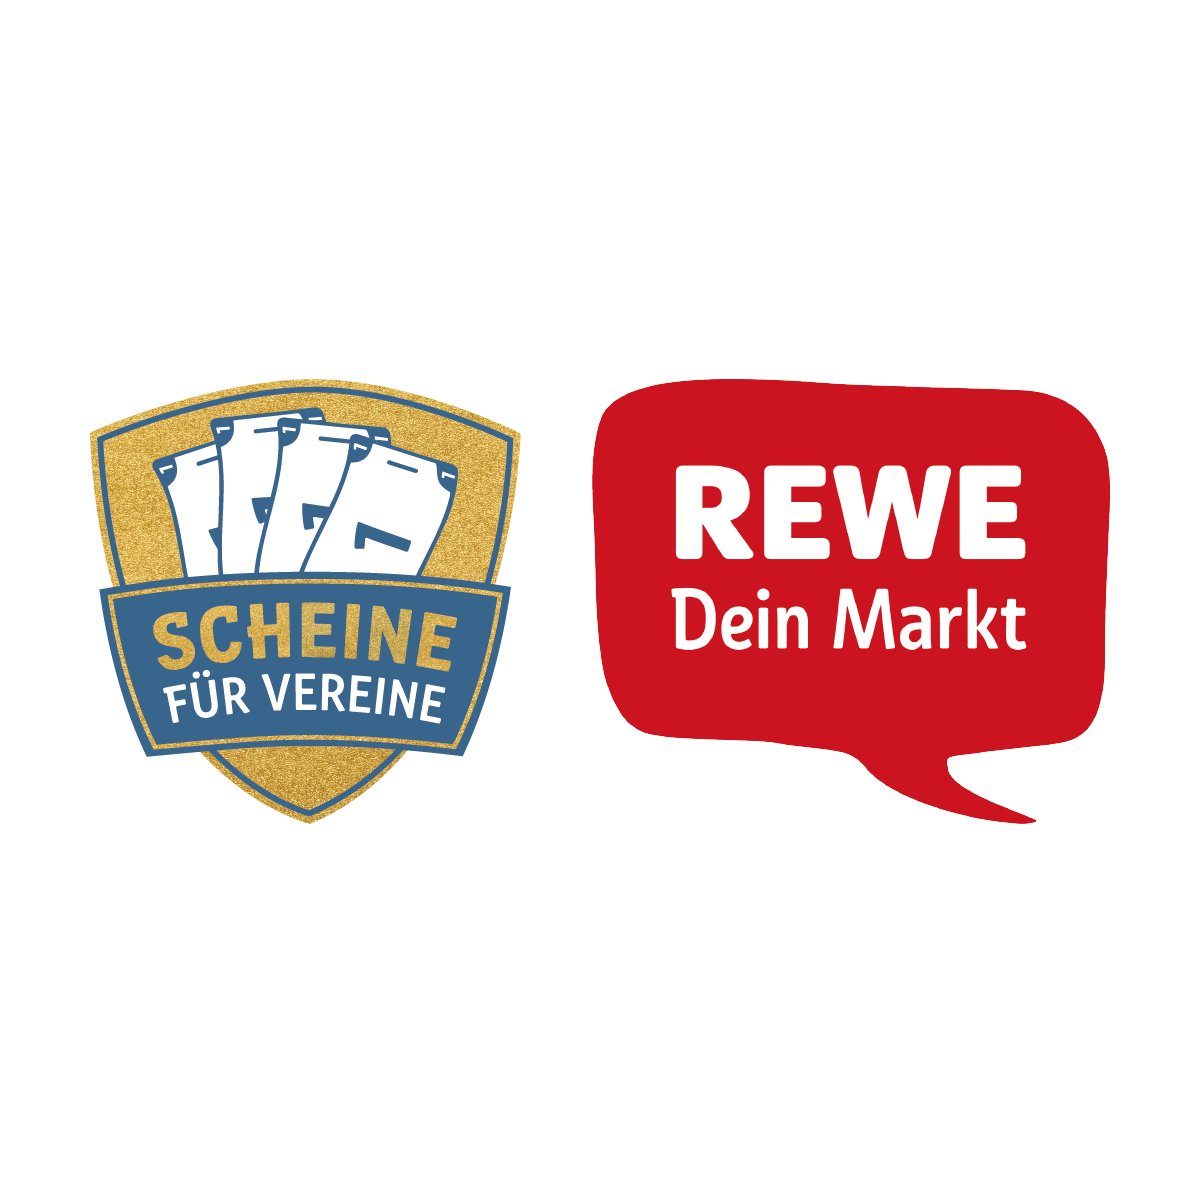 You are currently viewing Ende der Rewe Aktion